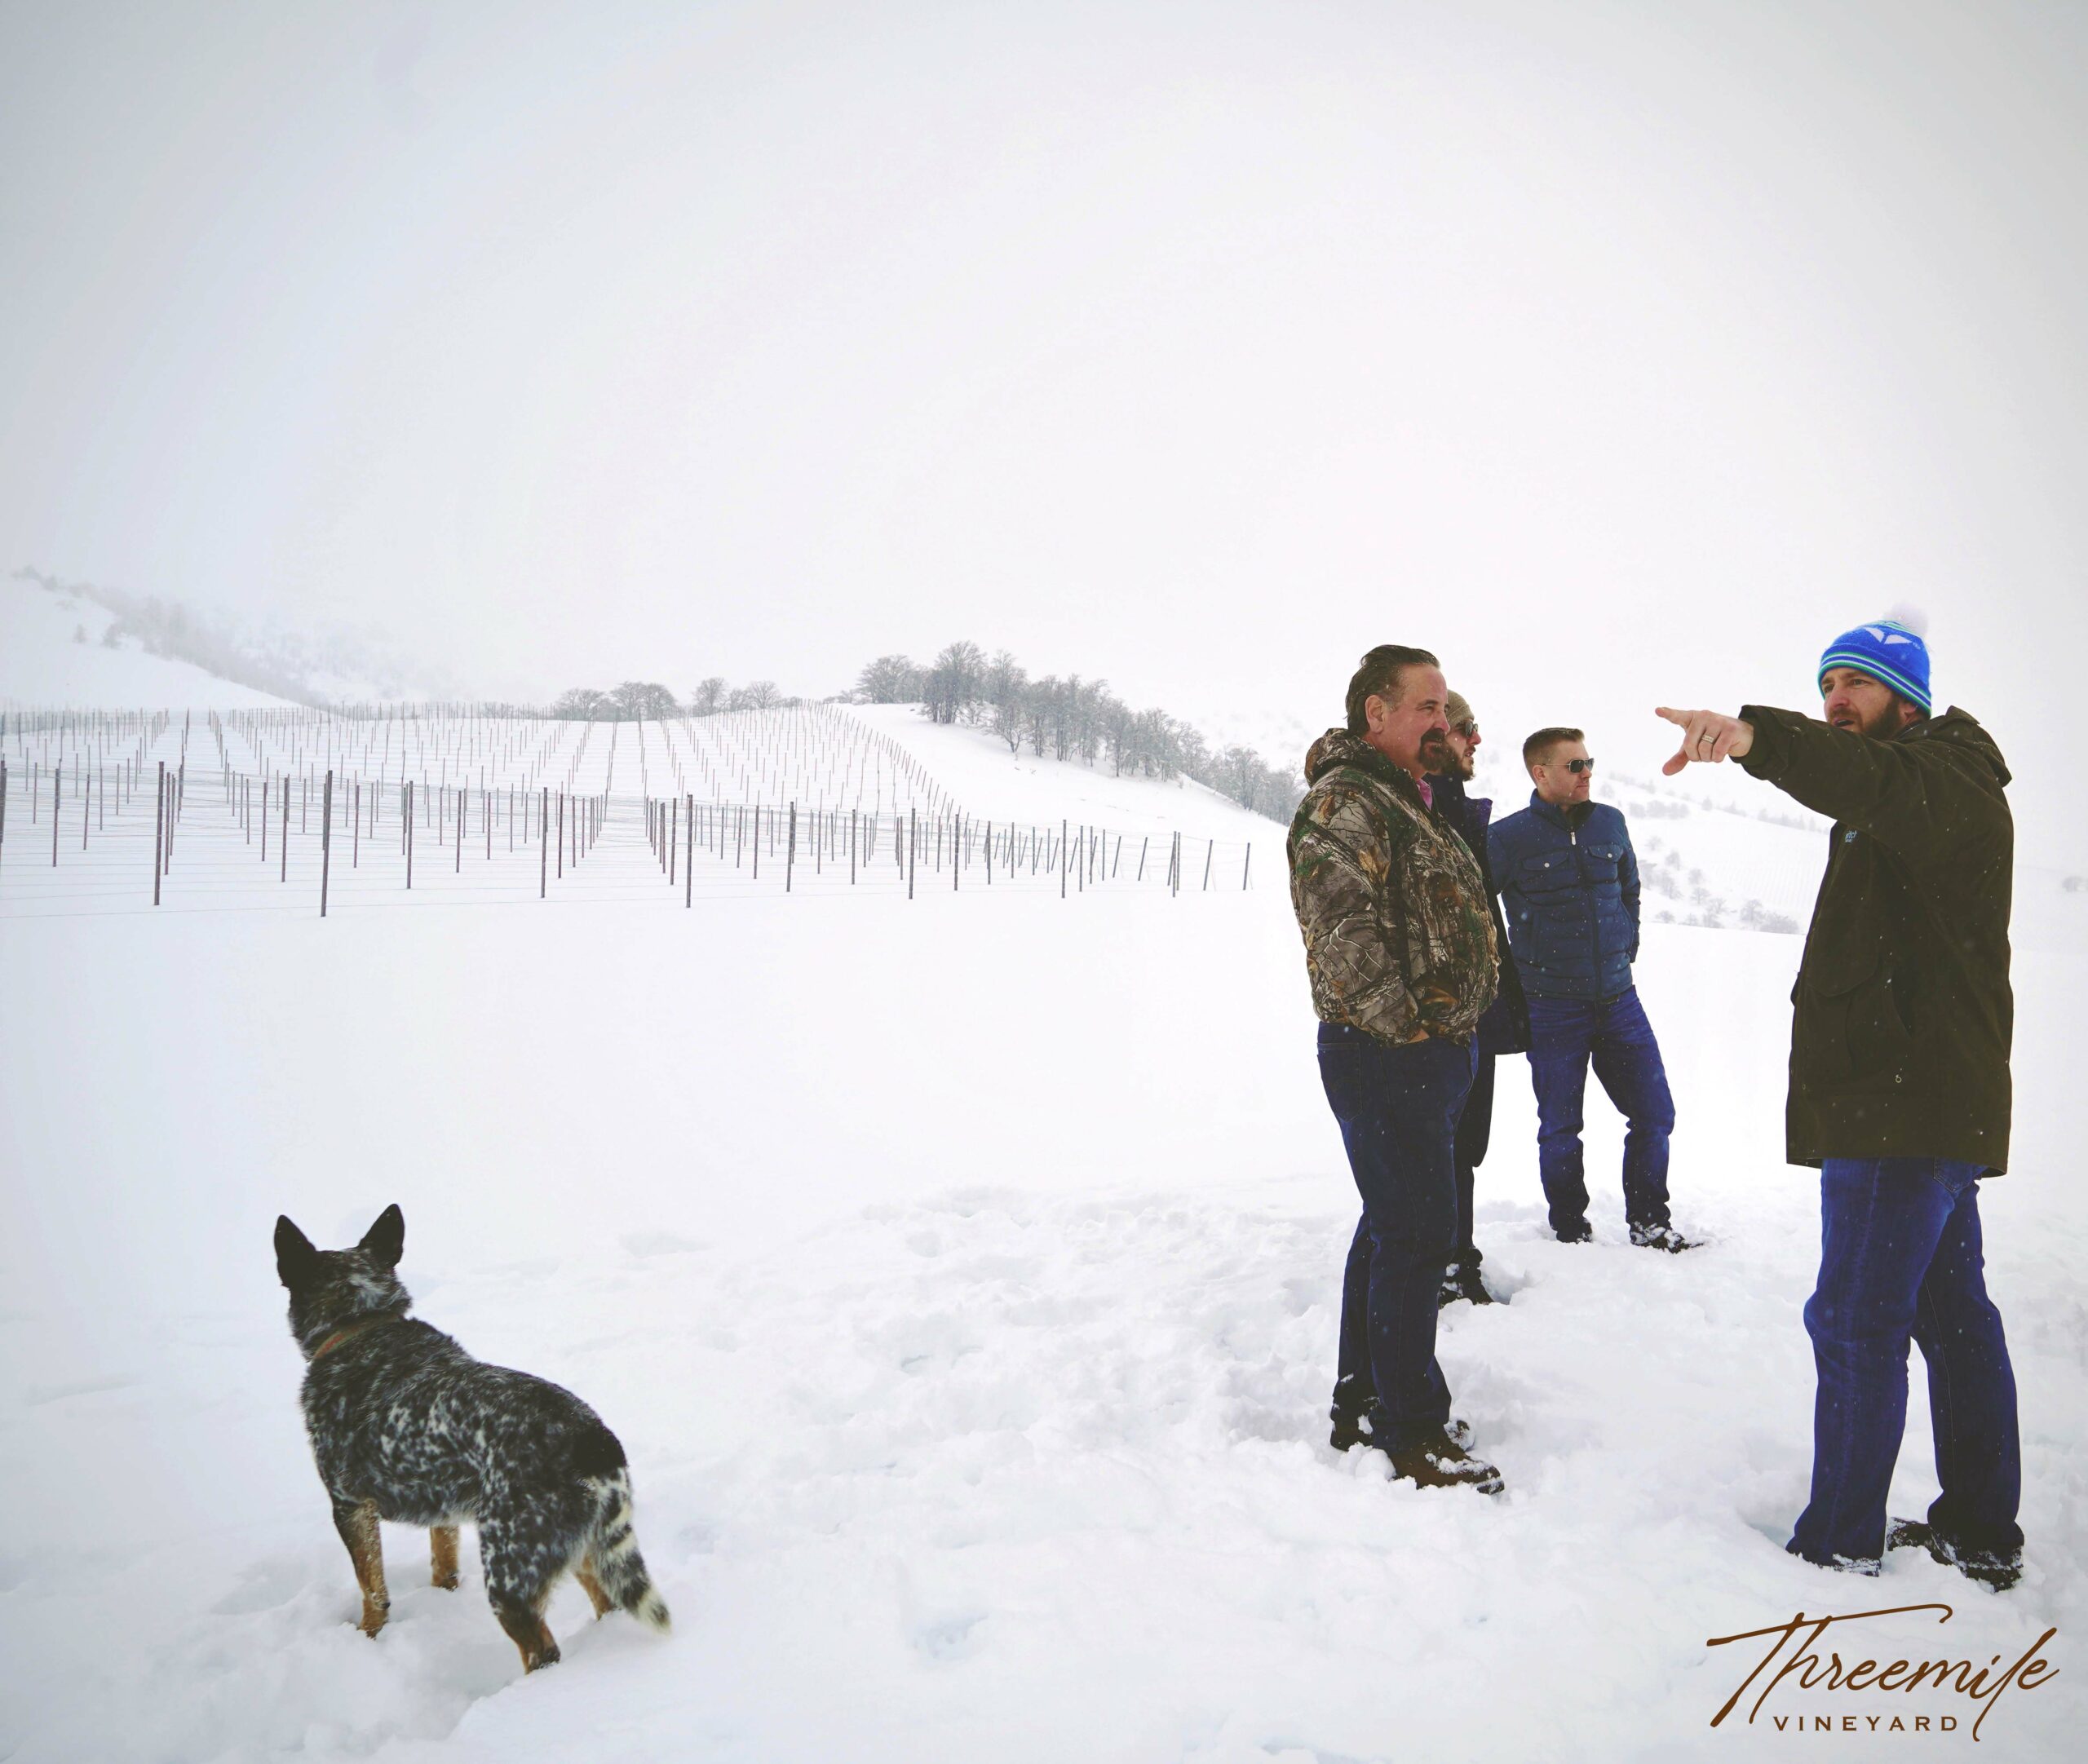 Dog and people in the vineyard in the winter snow